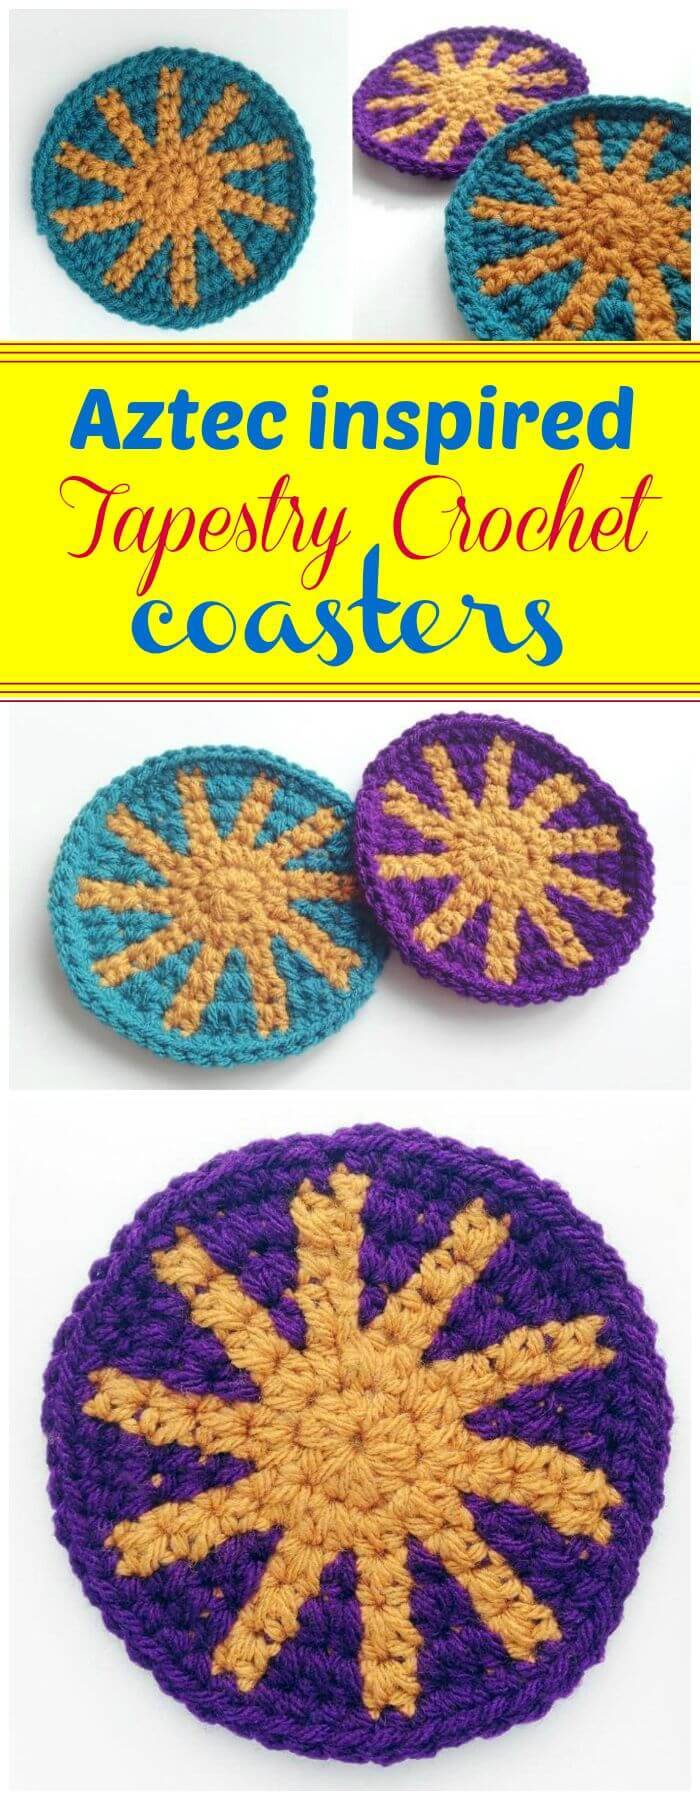 DIY Aztec Inspired Tapestry Crochet Coasters, crochet coasters tutorials! Crochet coaster patterns for beginners!